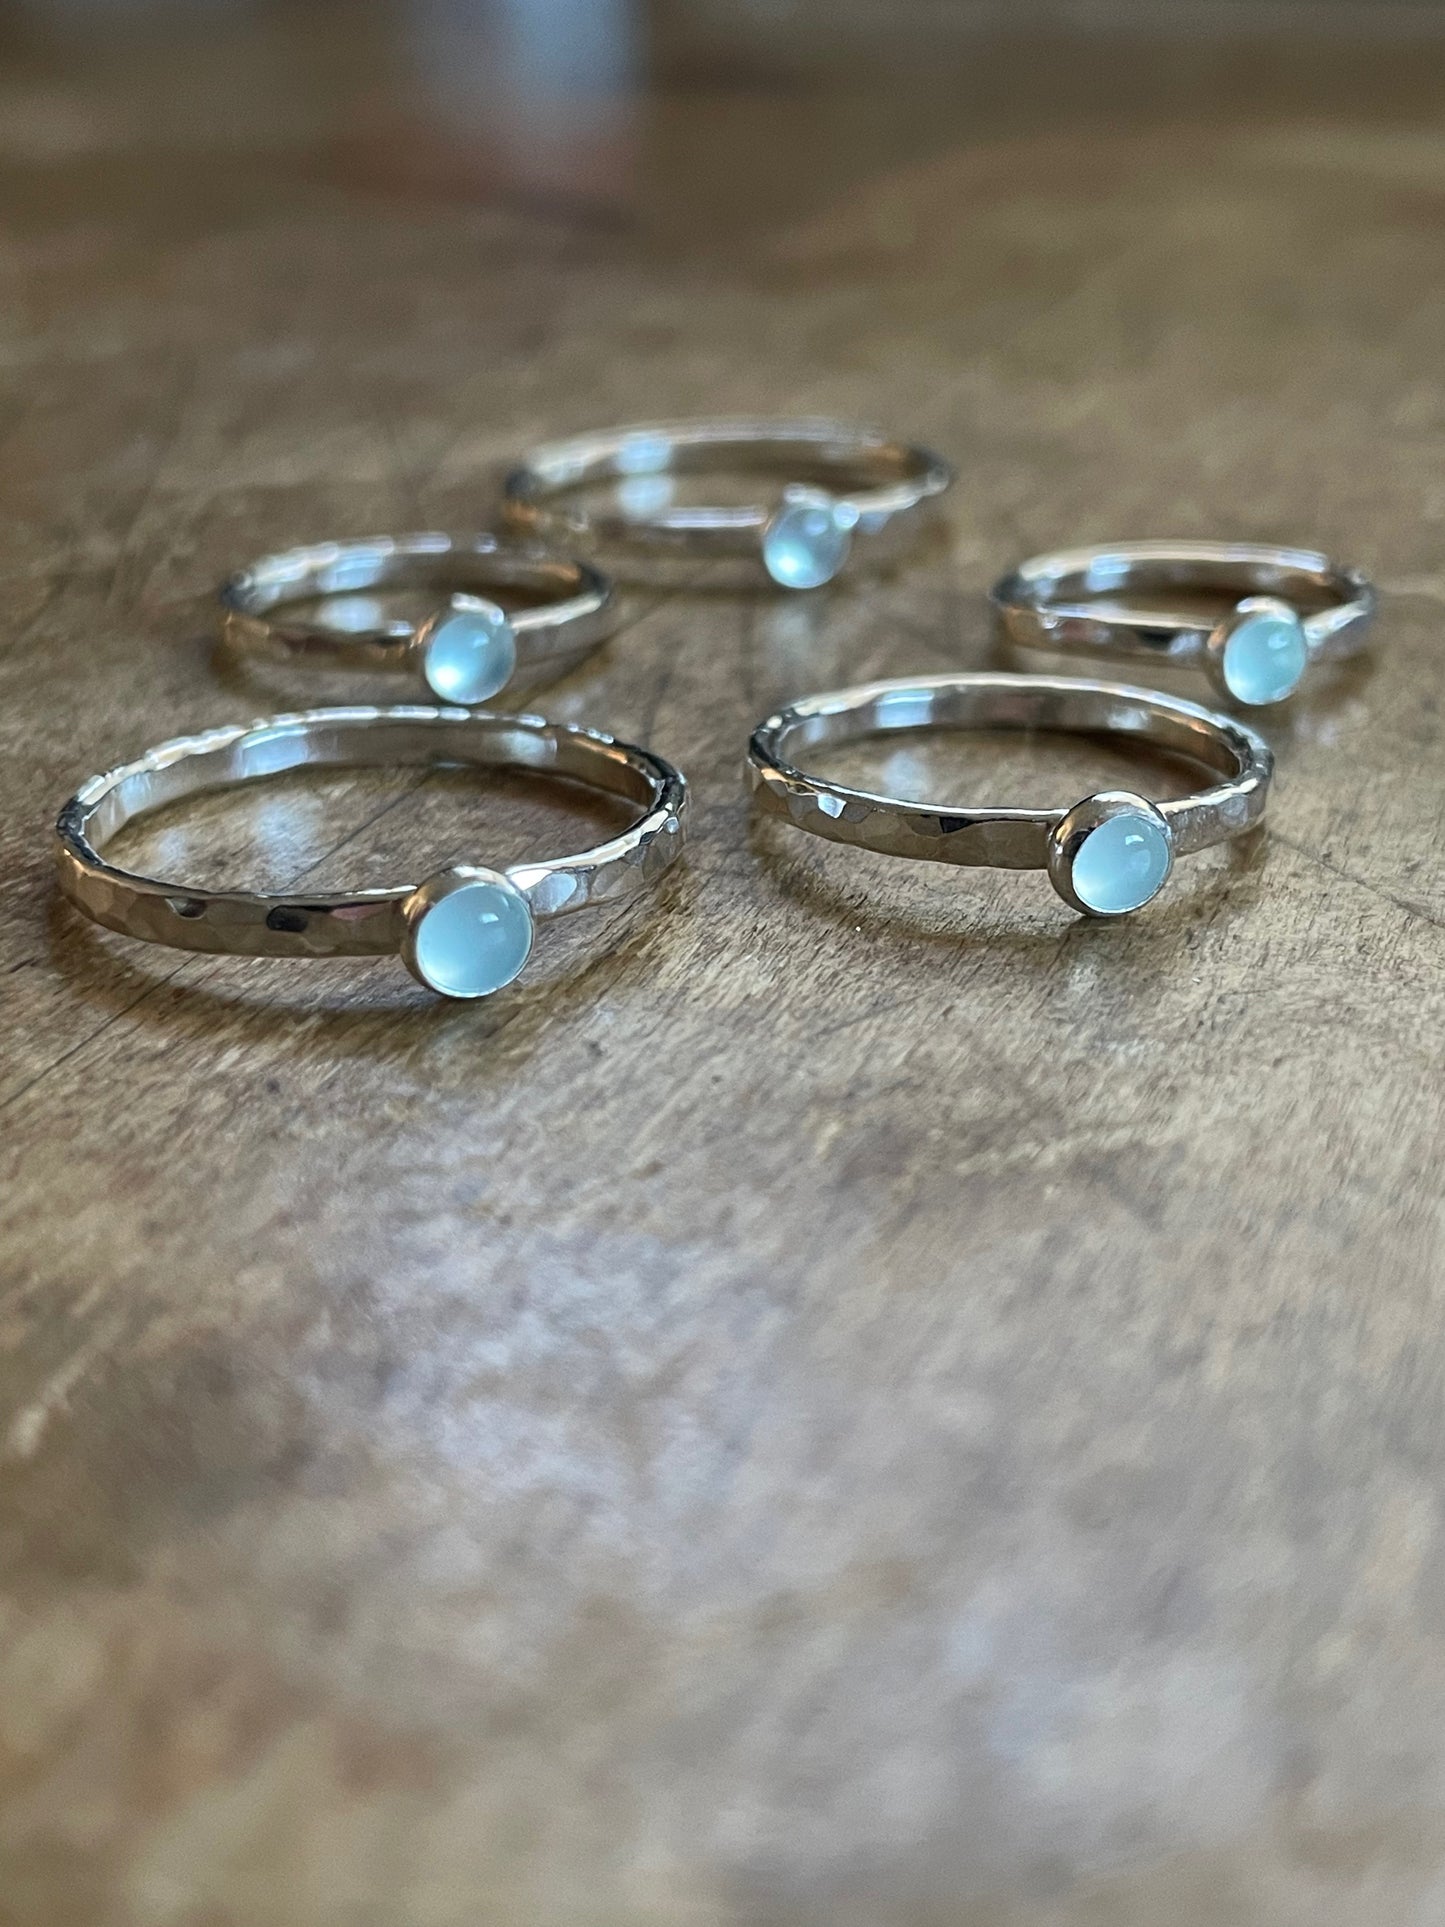 Sterling Silver, Chalcedony Ring, Hammered Silver and Aqua Chalcedony Ring, .925 Sterling Silver, Peruvian Chalcedony Ring, Handmade Ring